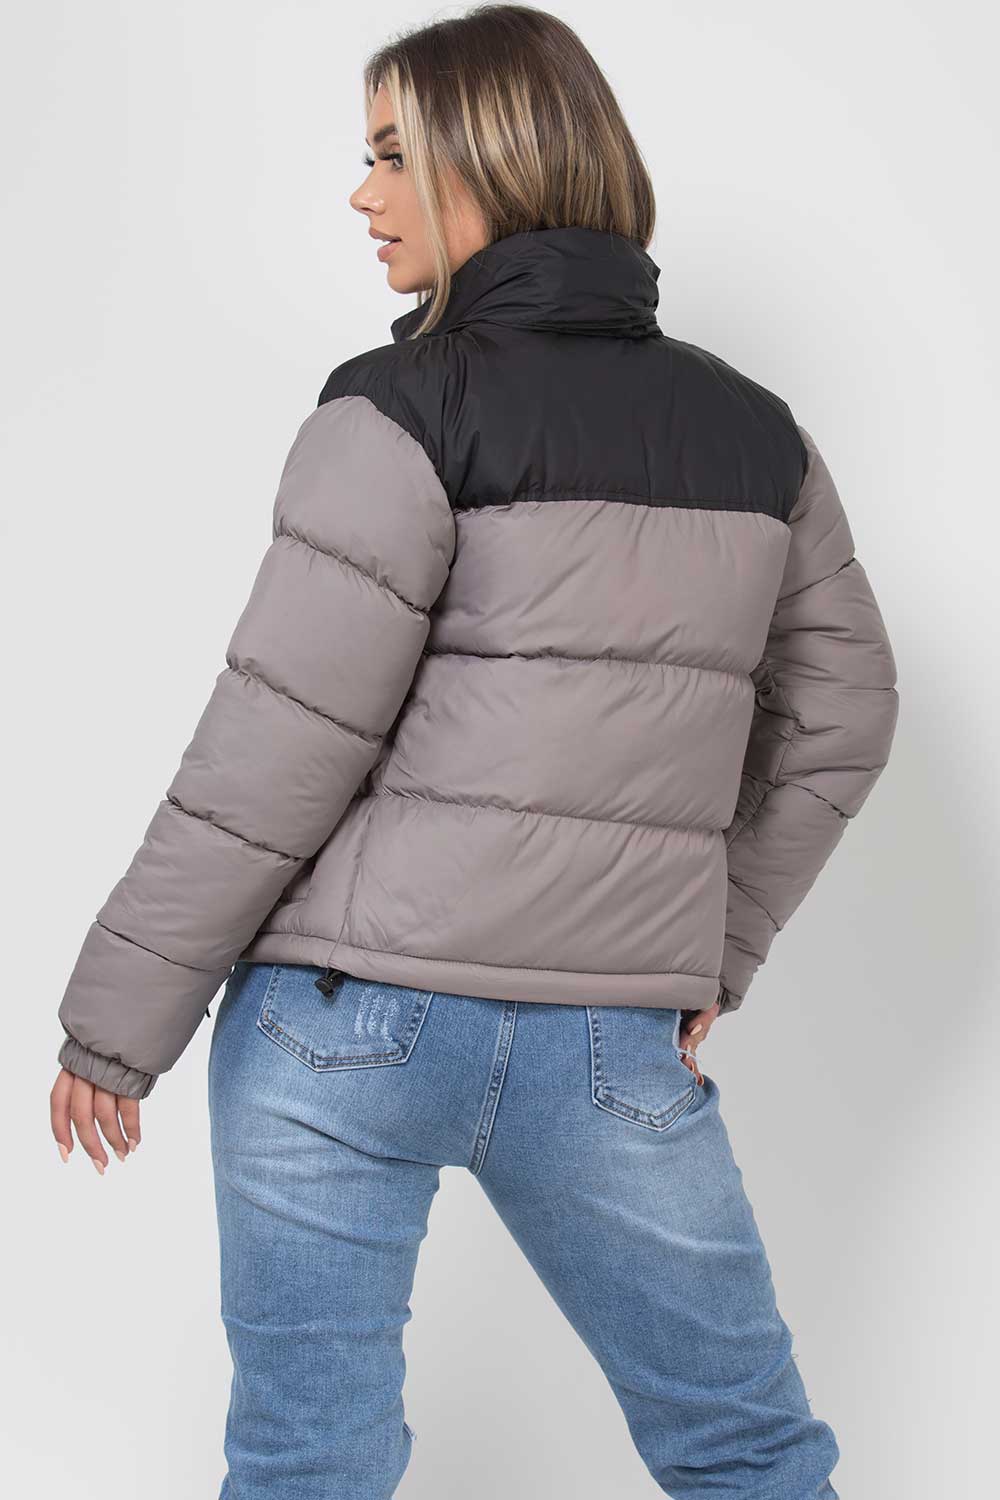 north face inspired puffer jacket womens